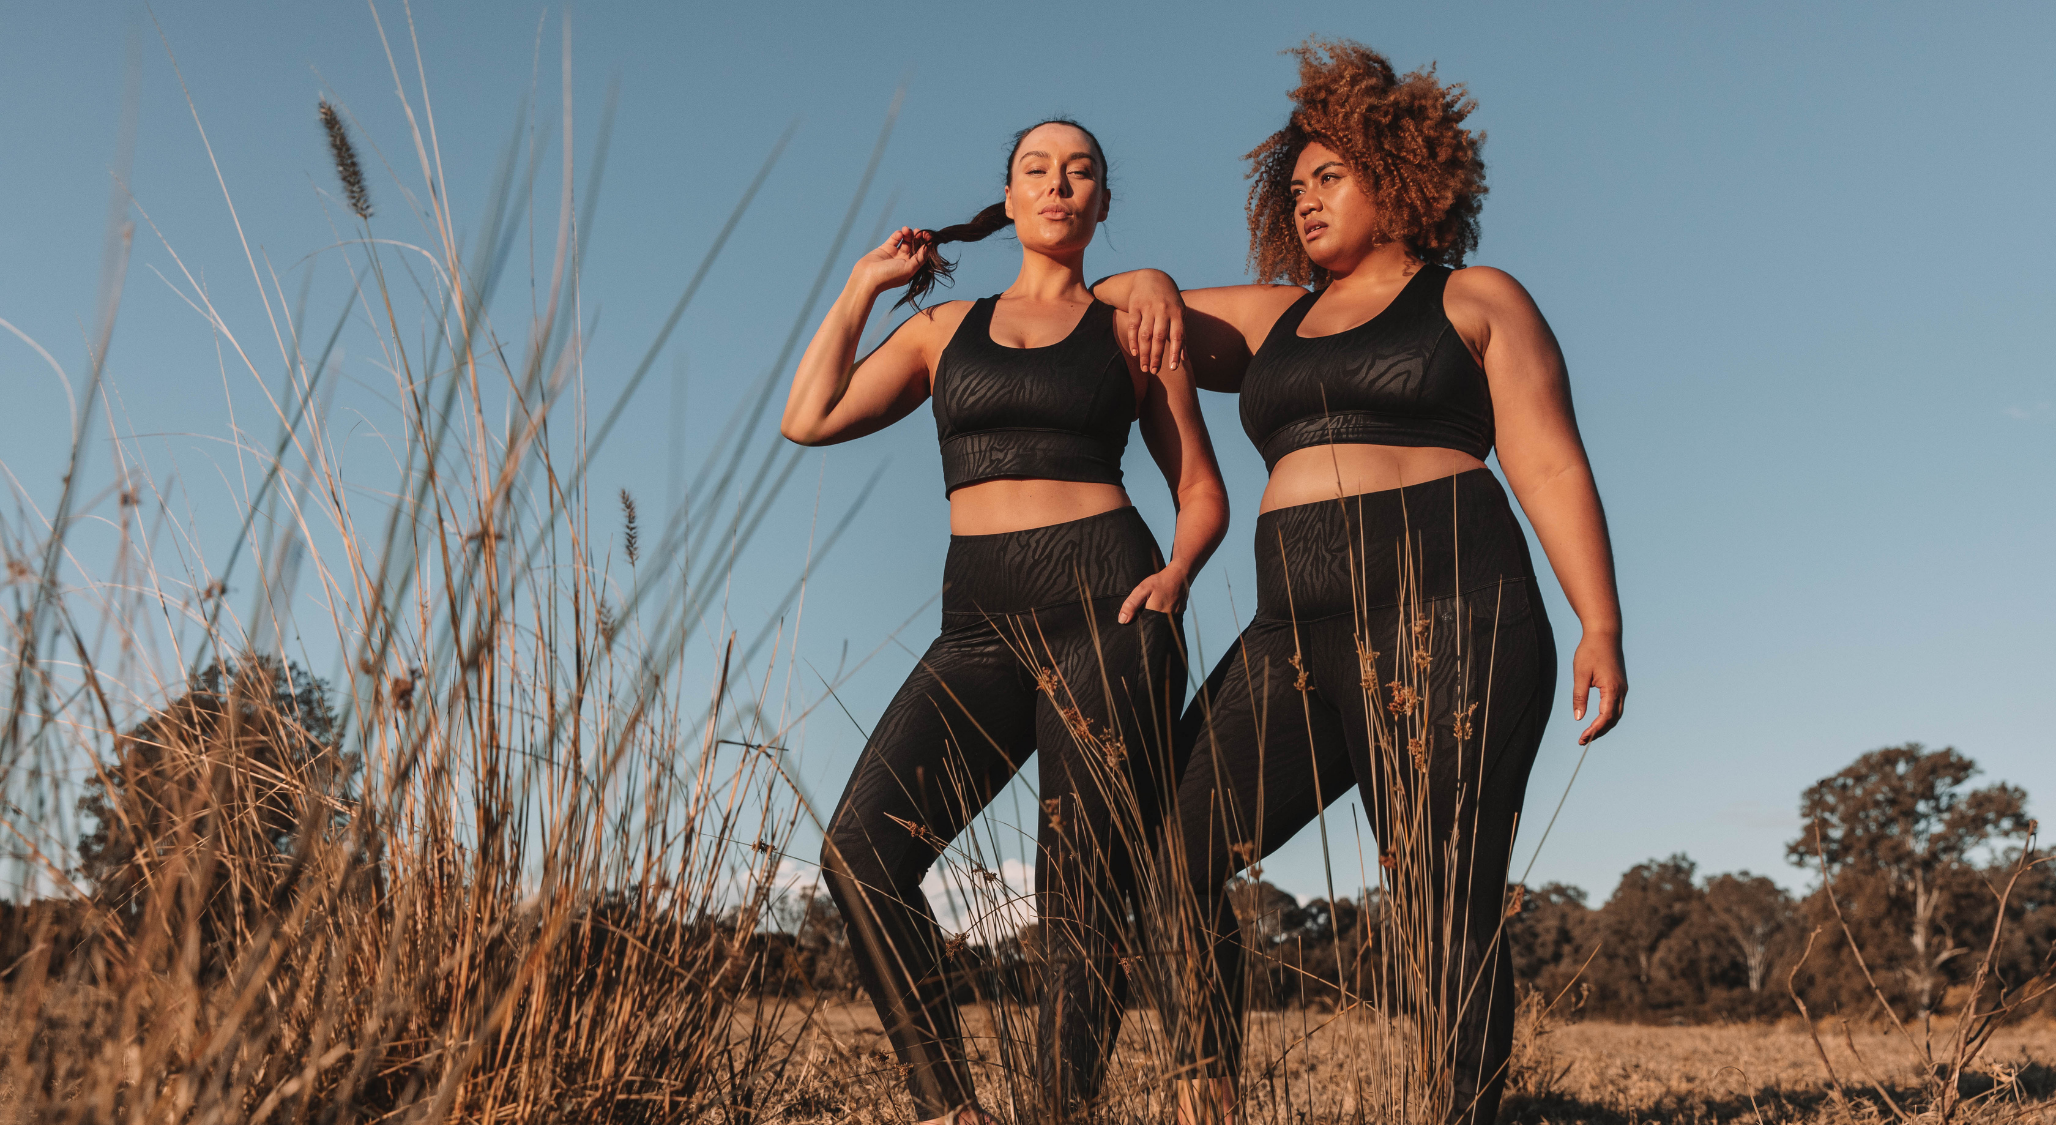 Two females in activewear